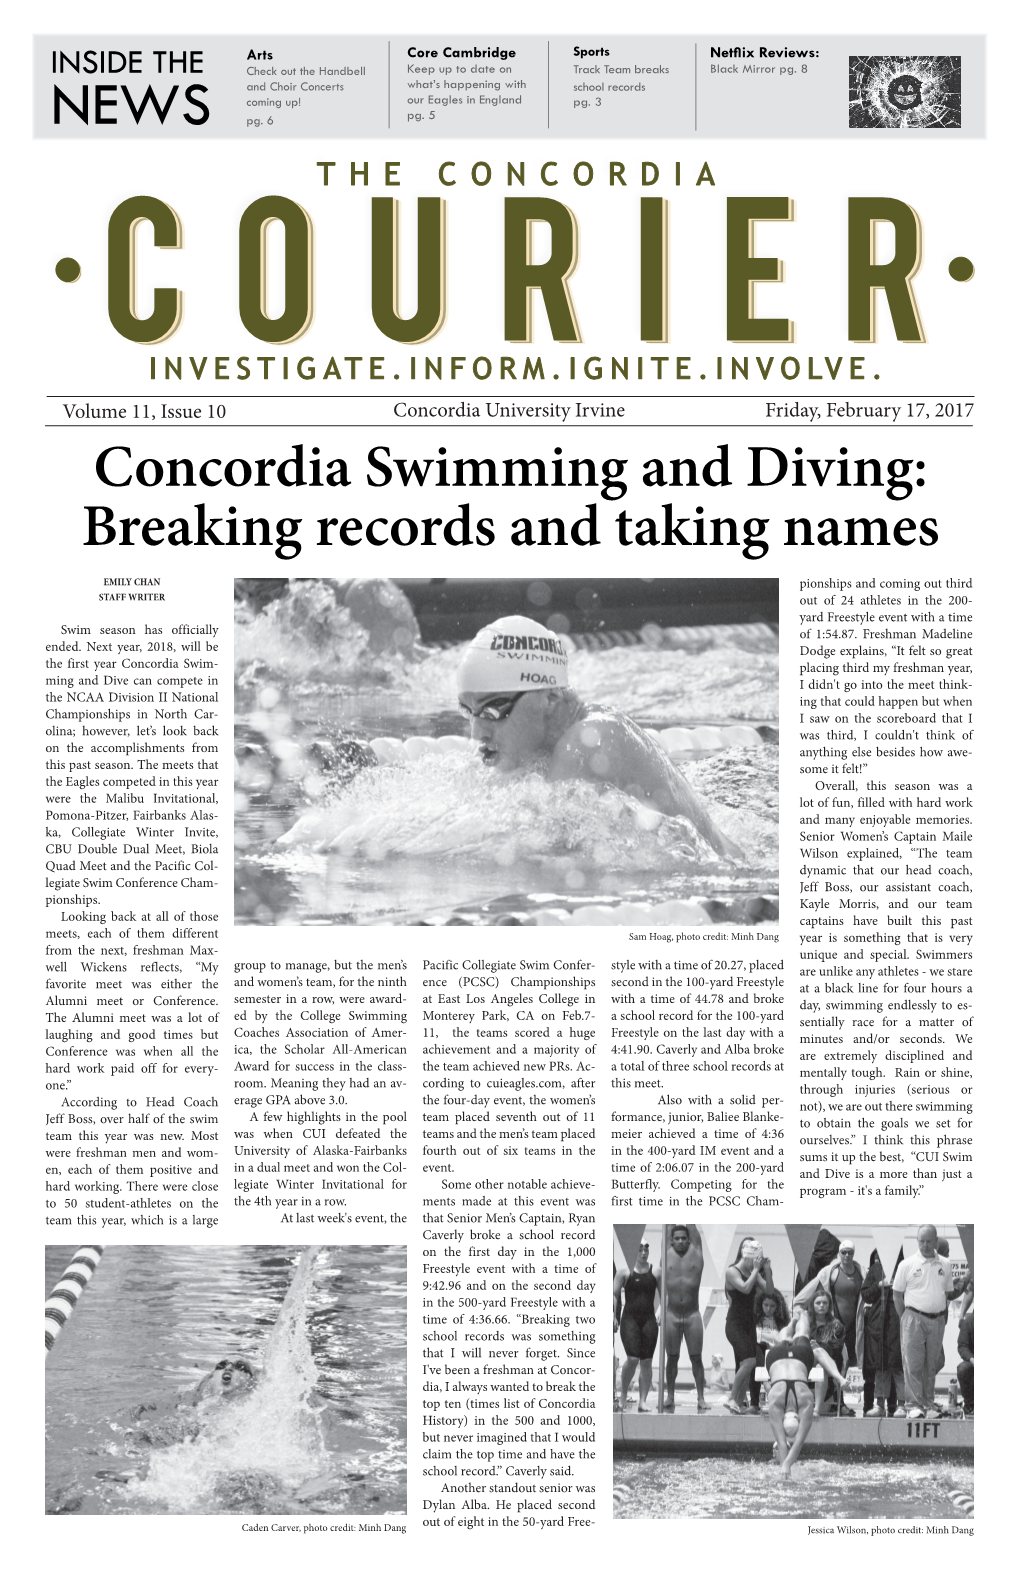 Concordia Swimming and Diving